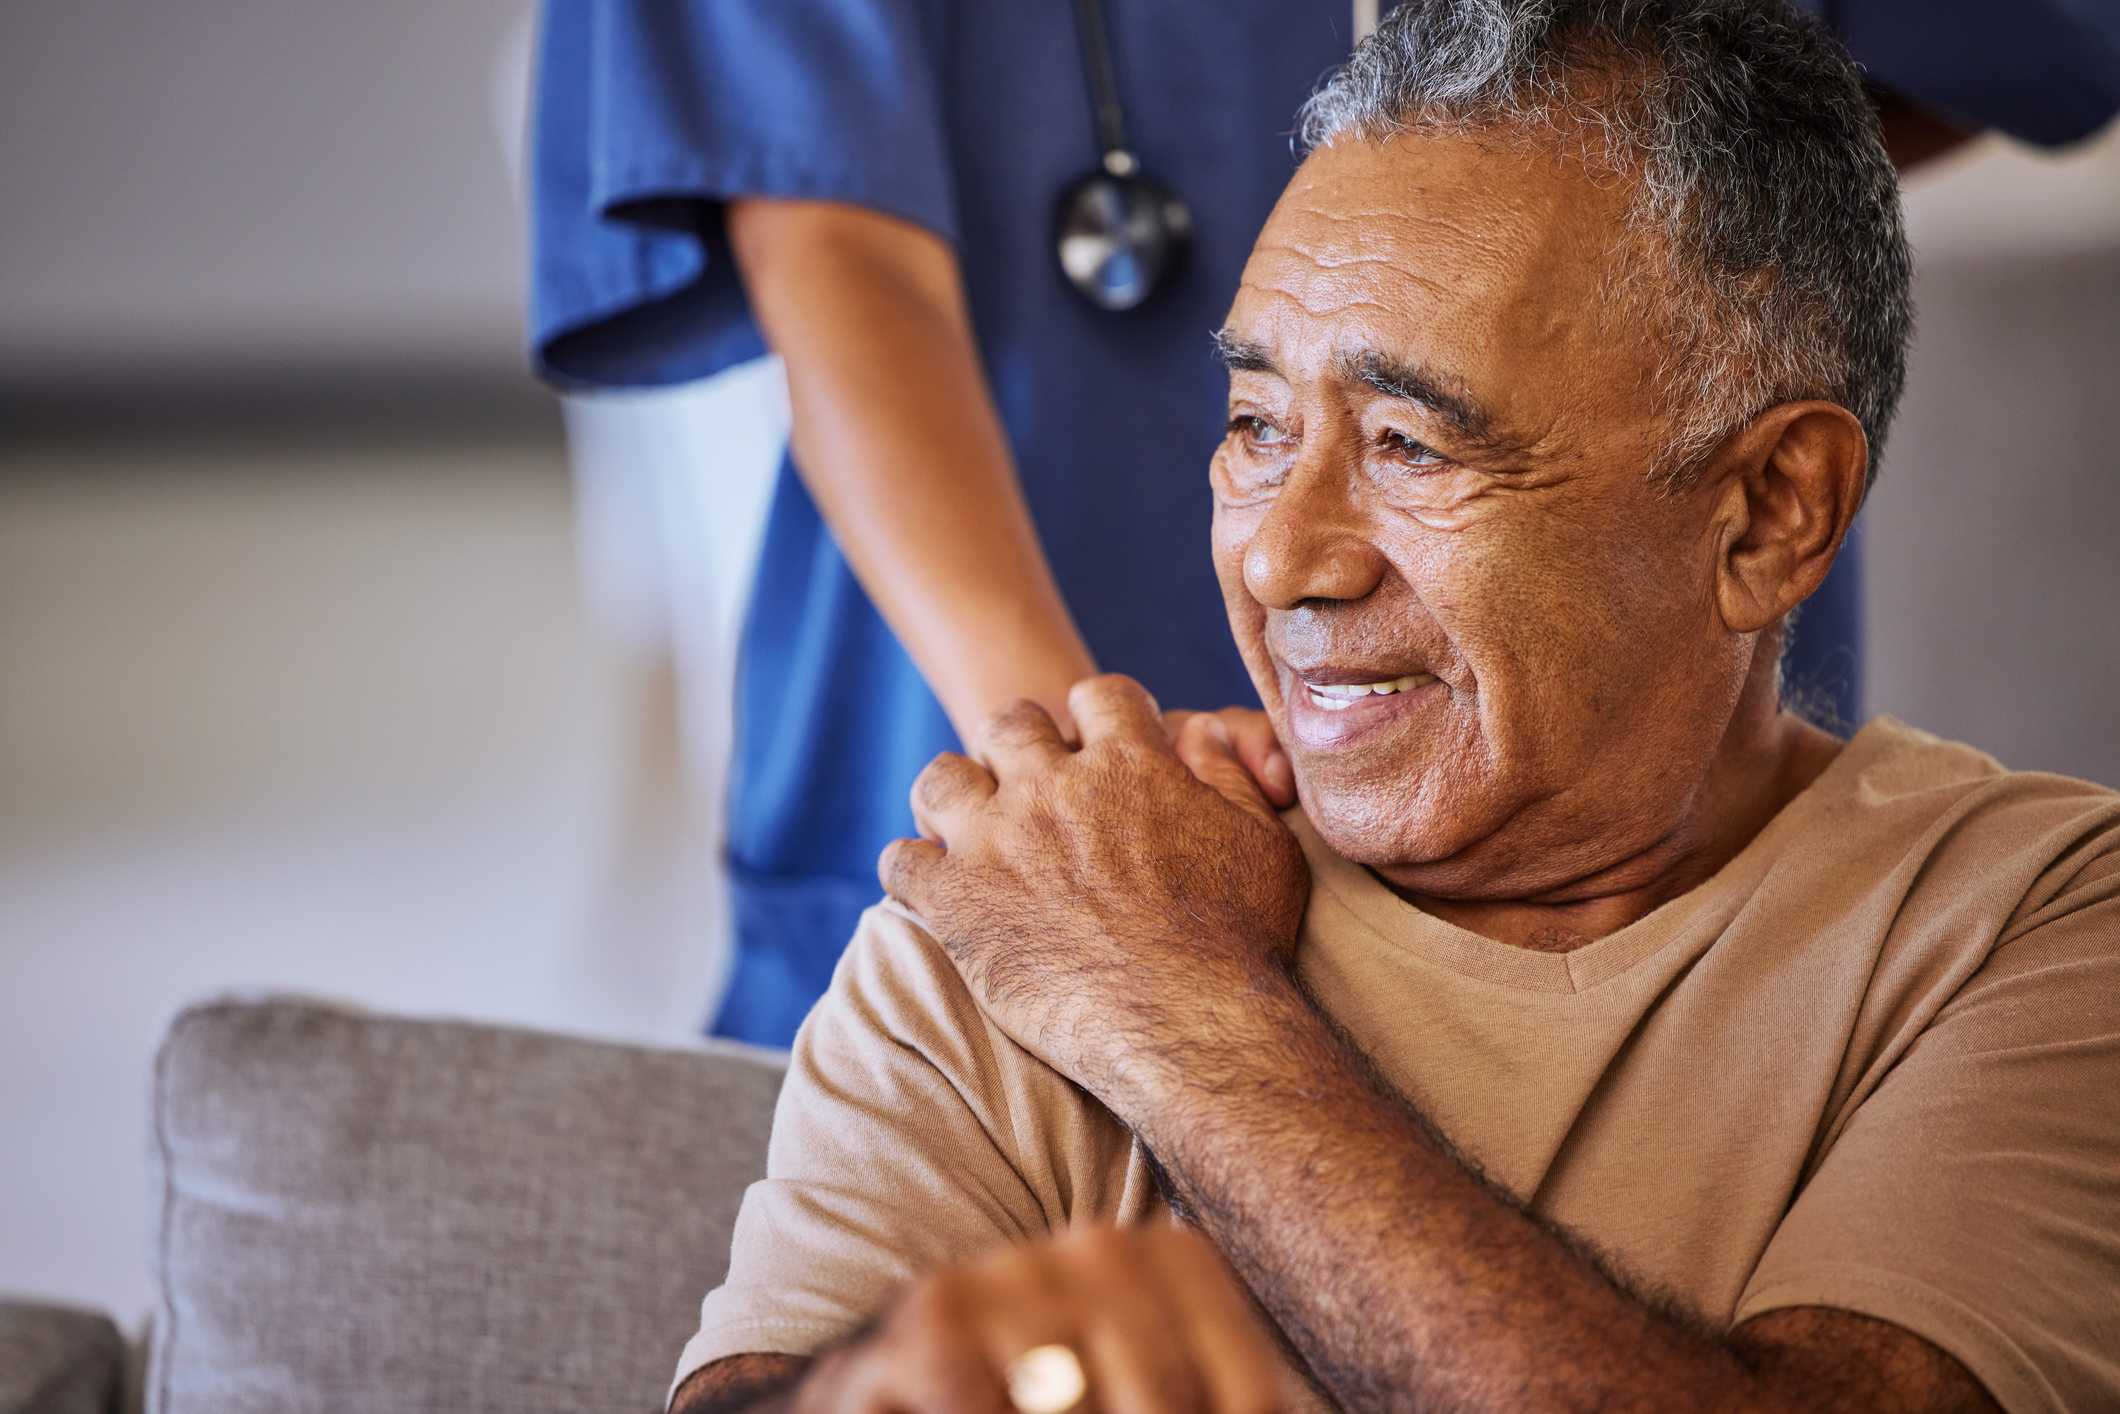 Smiling elderly man at home with a nurse placing a hand on his shoulder, displaying care